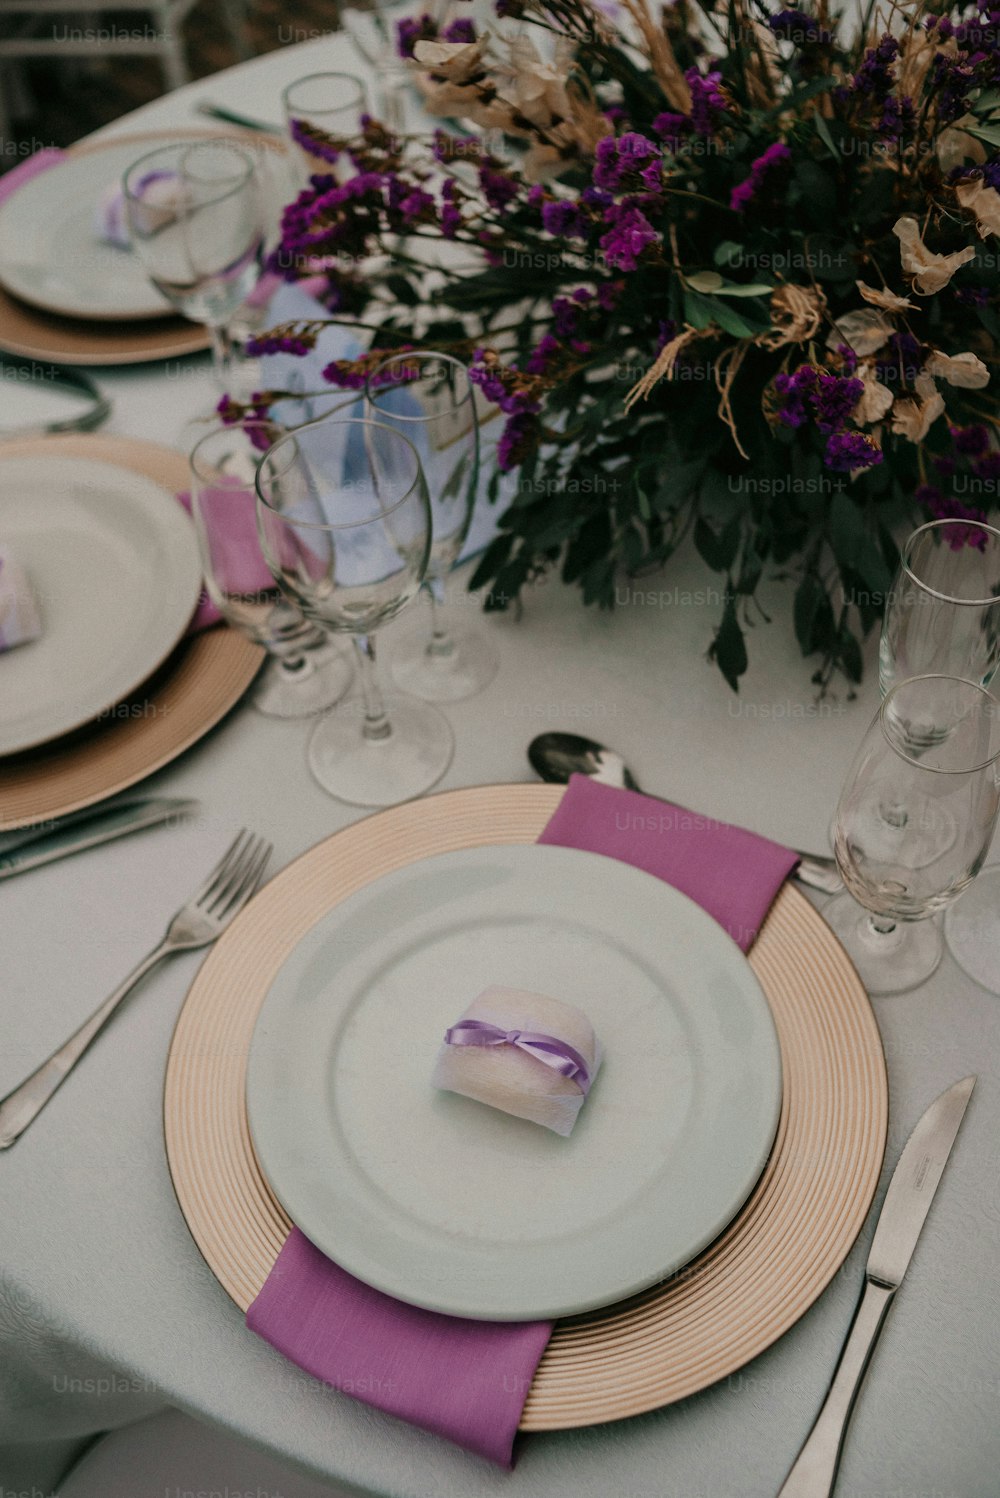 a table is set with plates and silverware